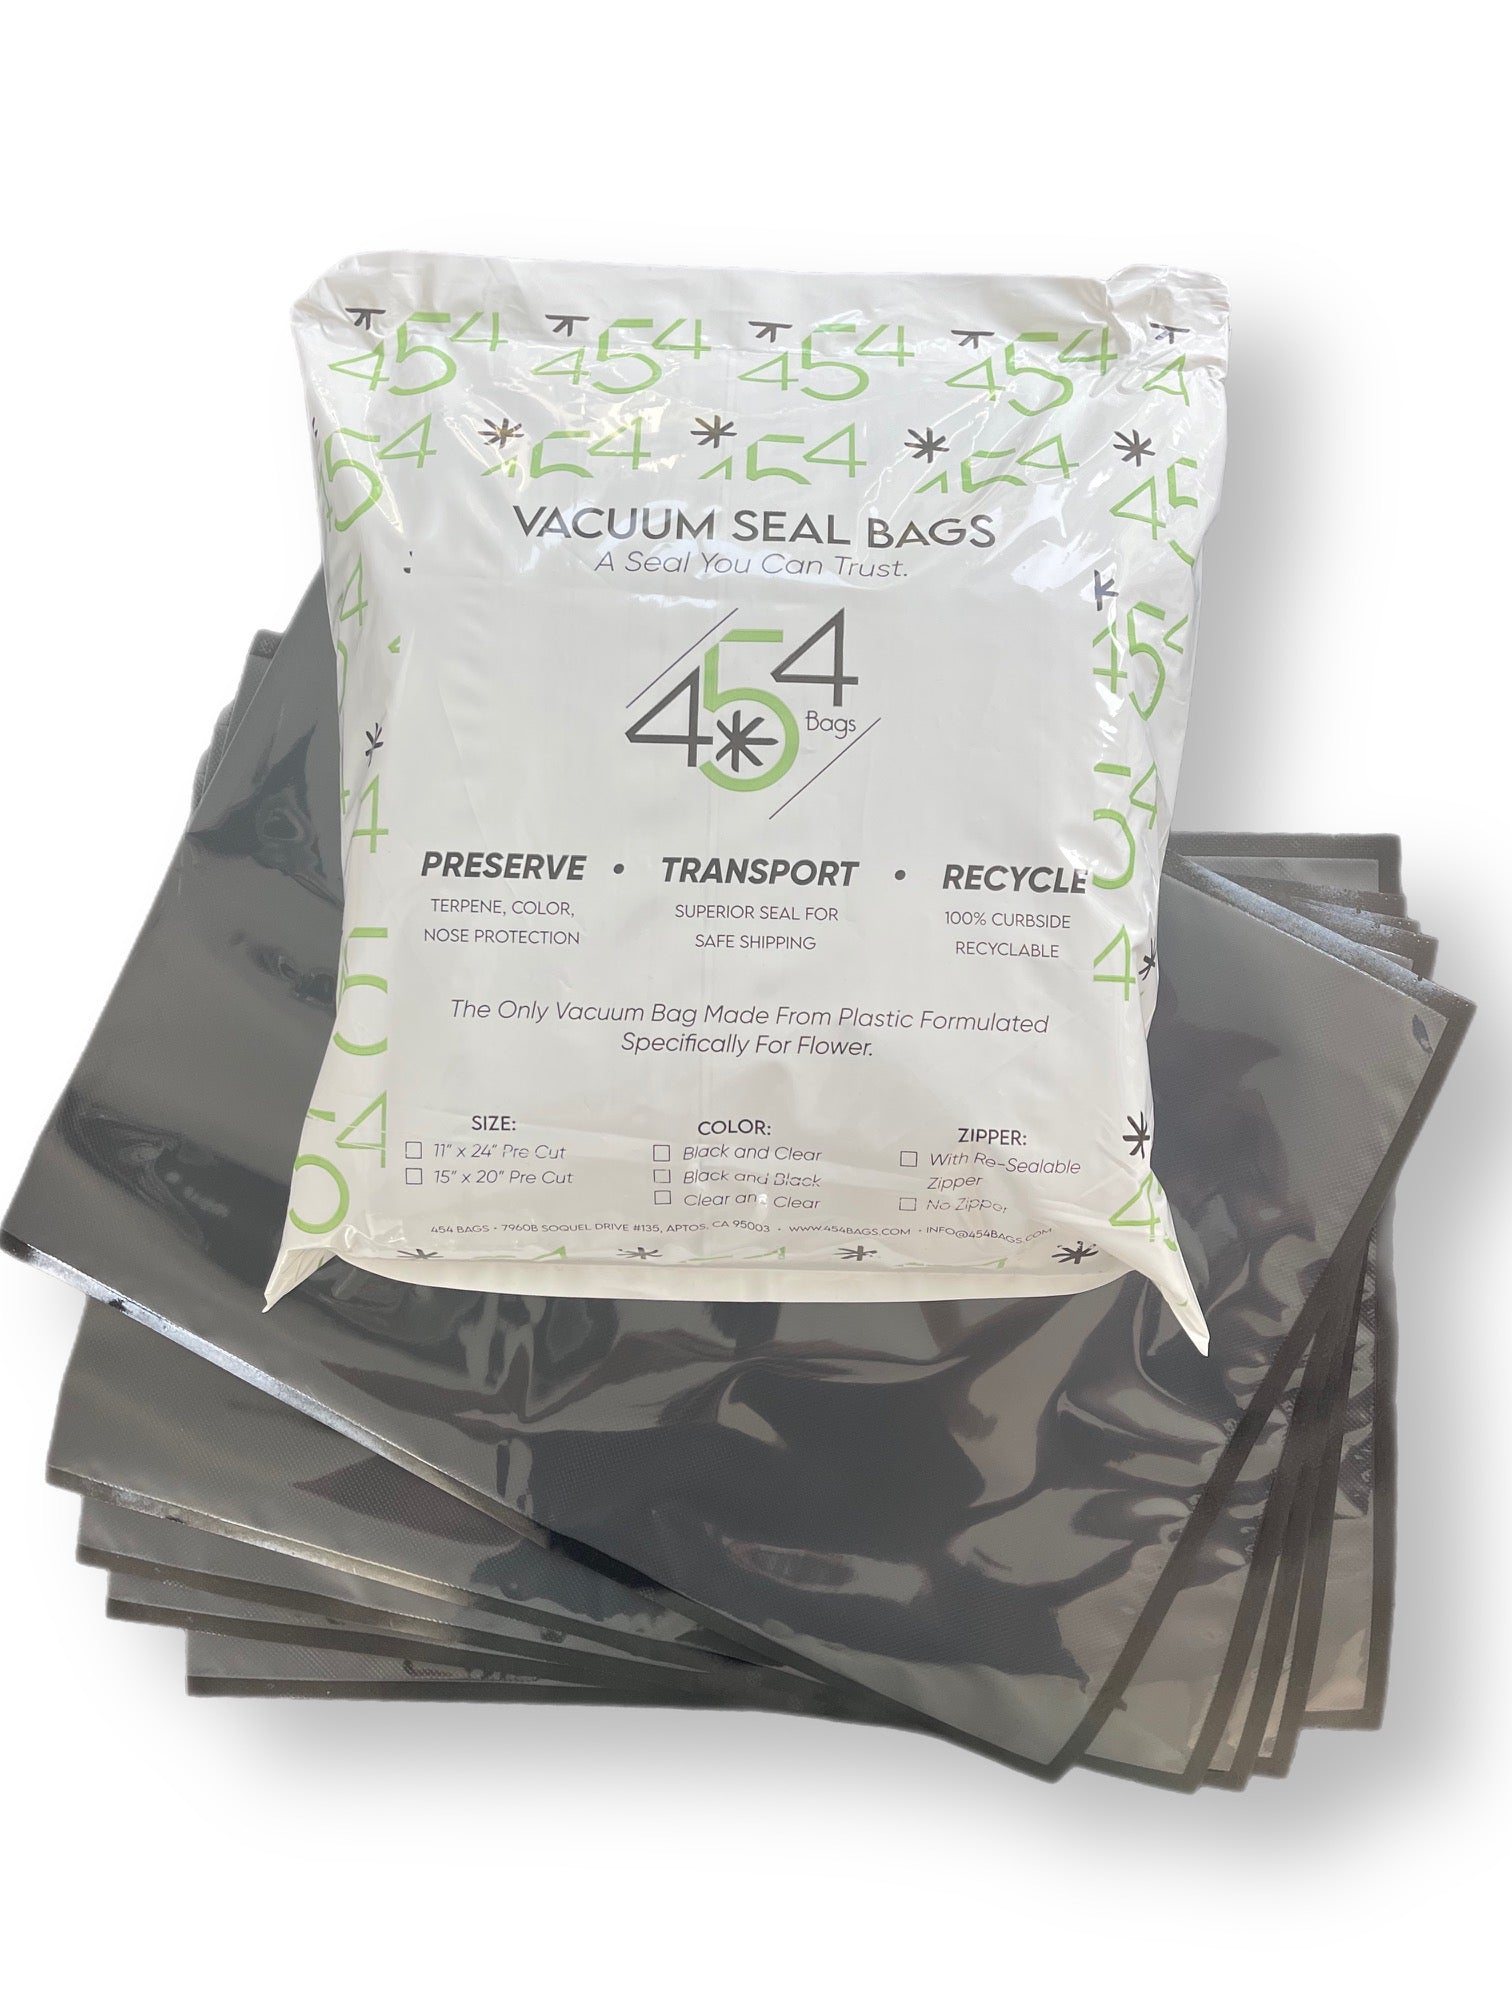 Packaging and samples of 454 Vacuum Bags, 15"x20" in size, formulated specially for cannabis storage. One side is clear, revealing the cannabis inside, and the other side is solid black.